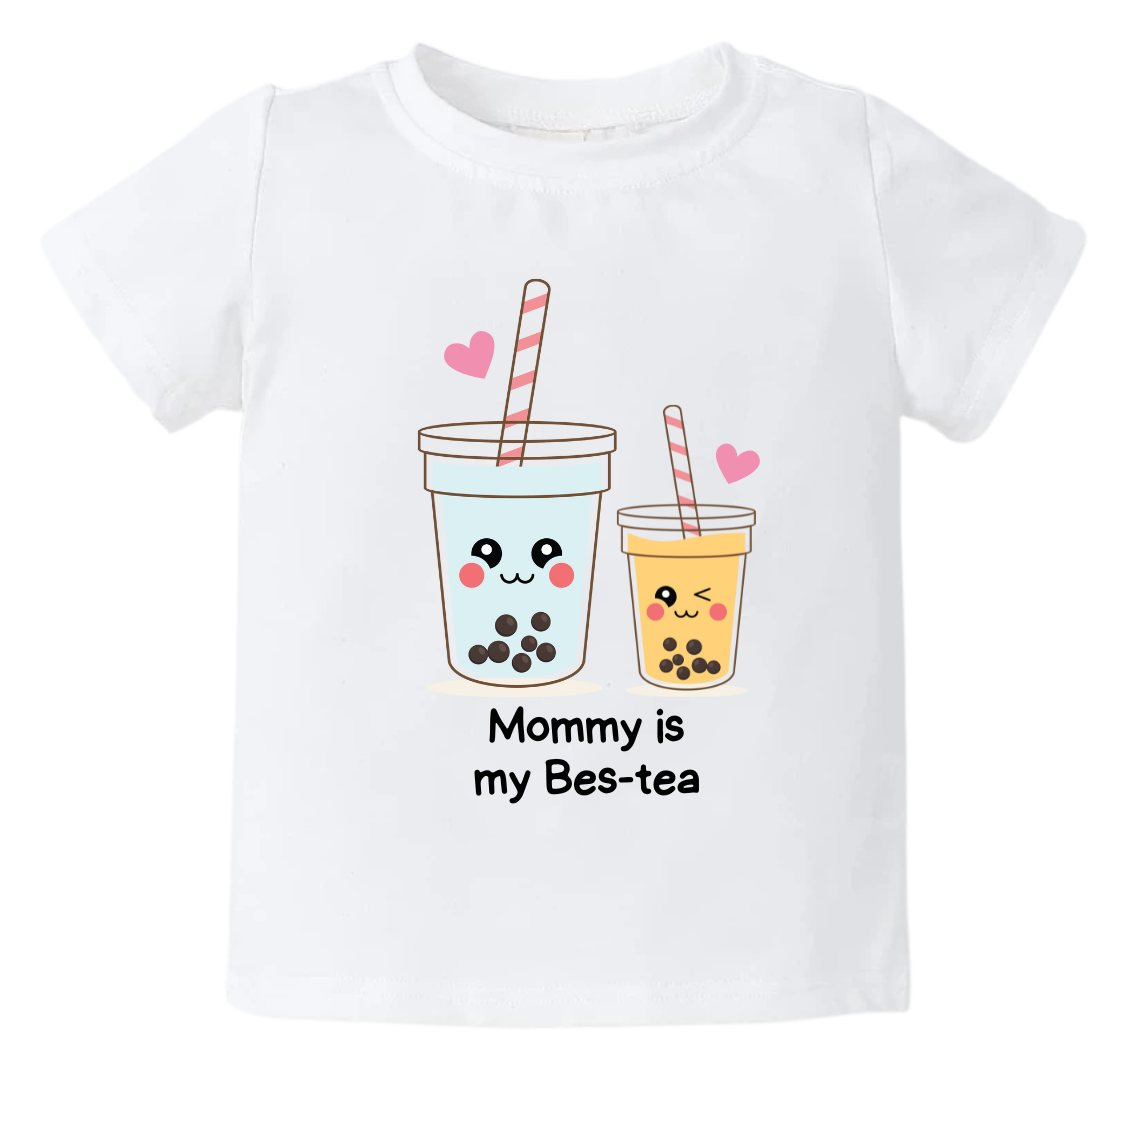 Cute Baby Onesie® Mommy Is My Bes-tea Shirt Baby Clothes Unisex Baby Announcement Gift for Mom